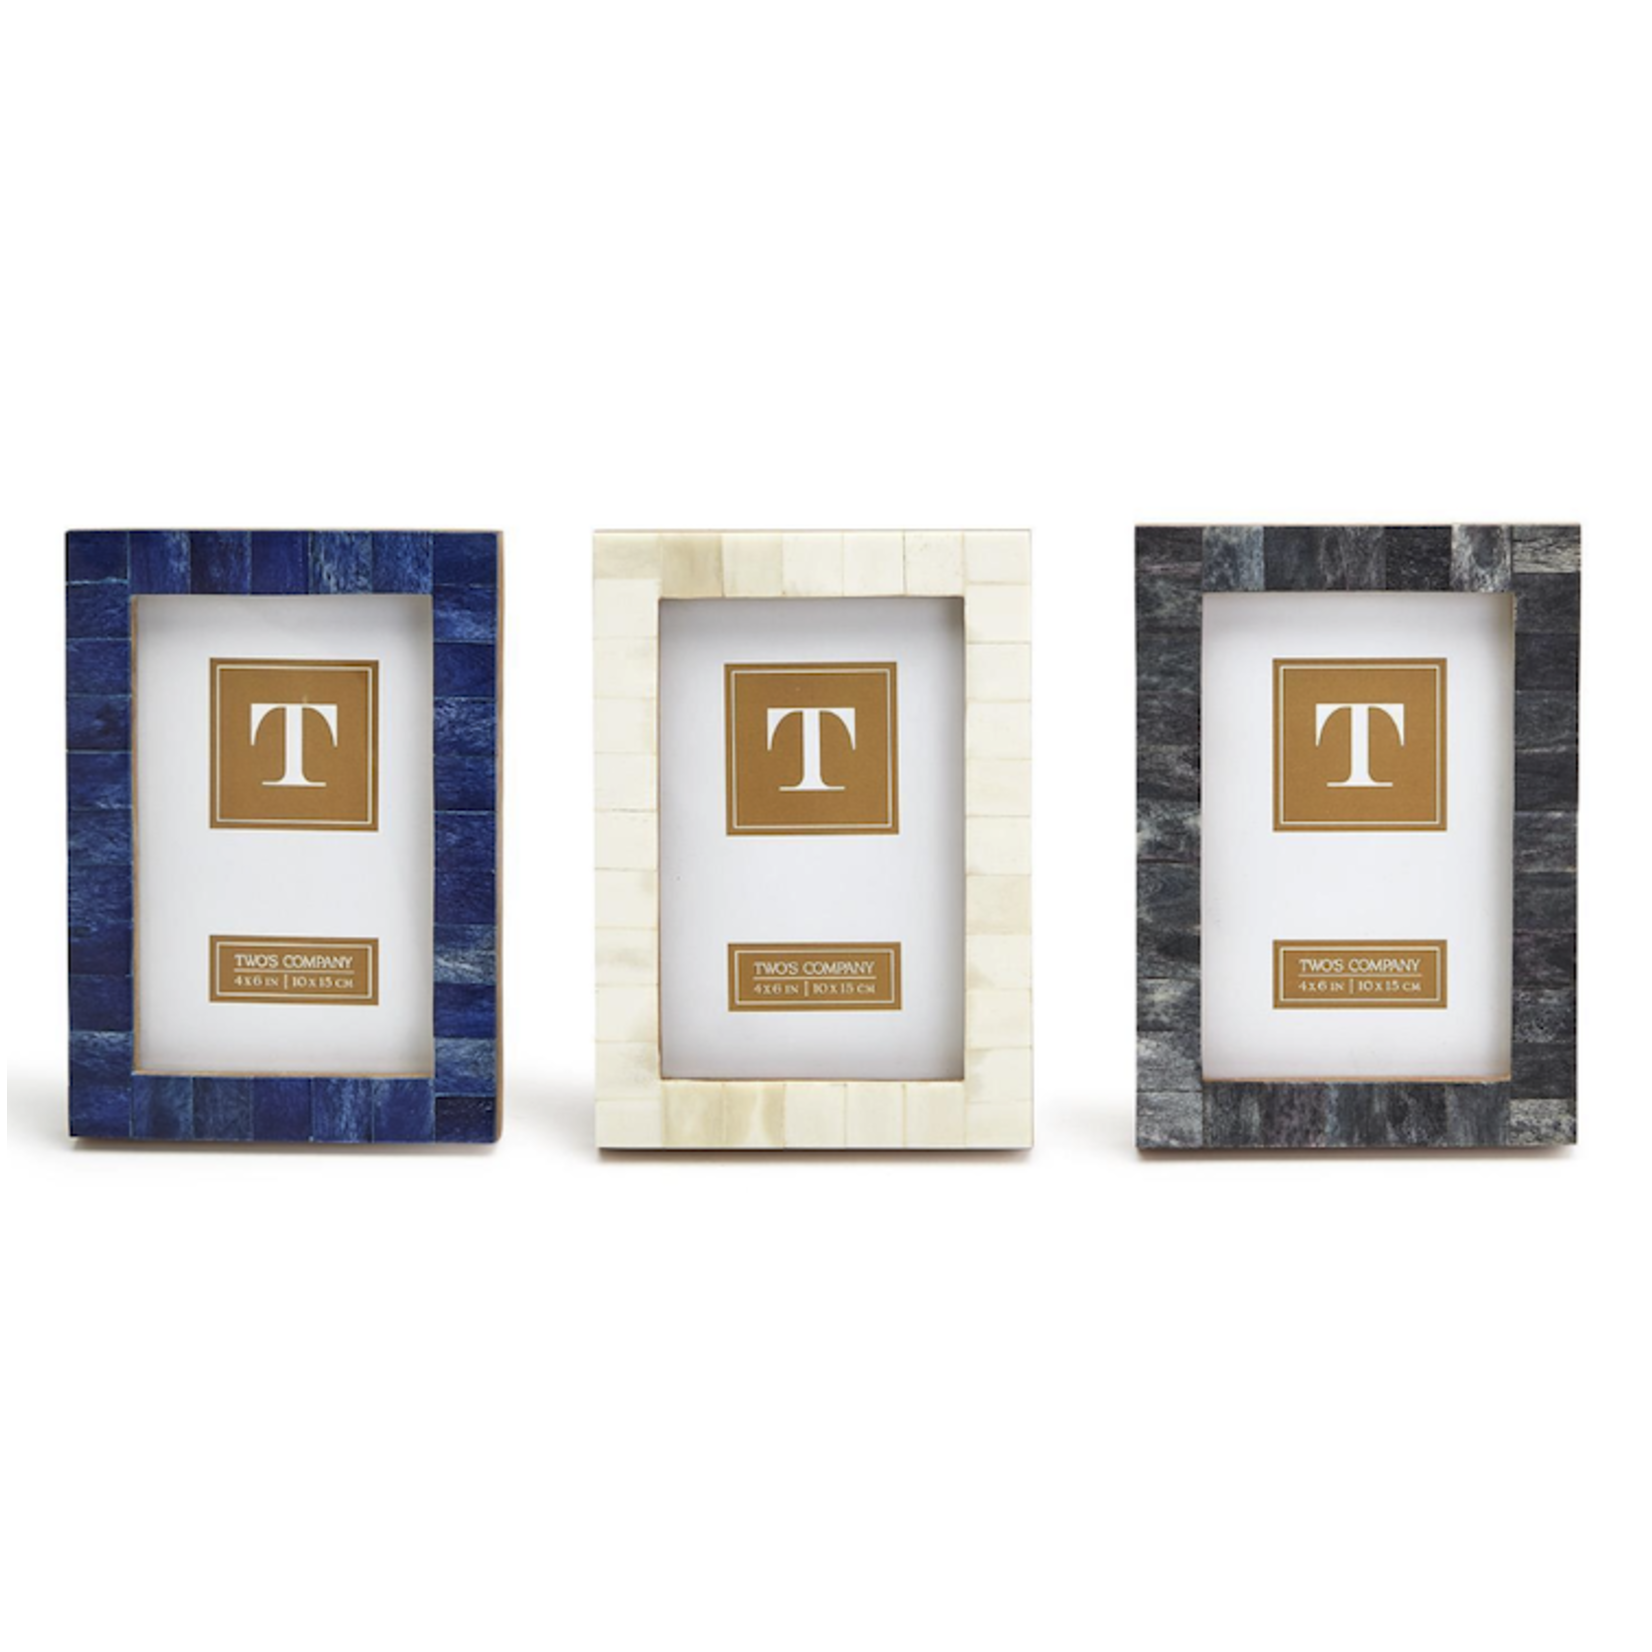 Outside The Box 4x6 Square Block Bone Inlay Photo Frame [ 3 Designs - SOLD SEPARATELY ]